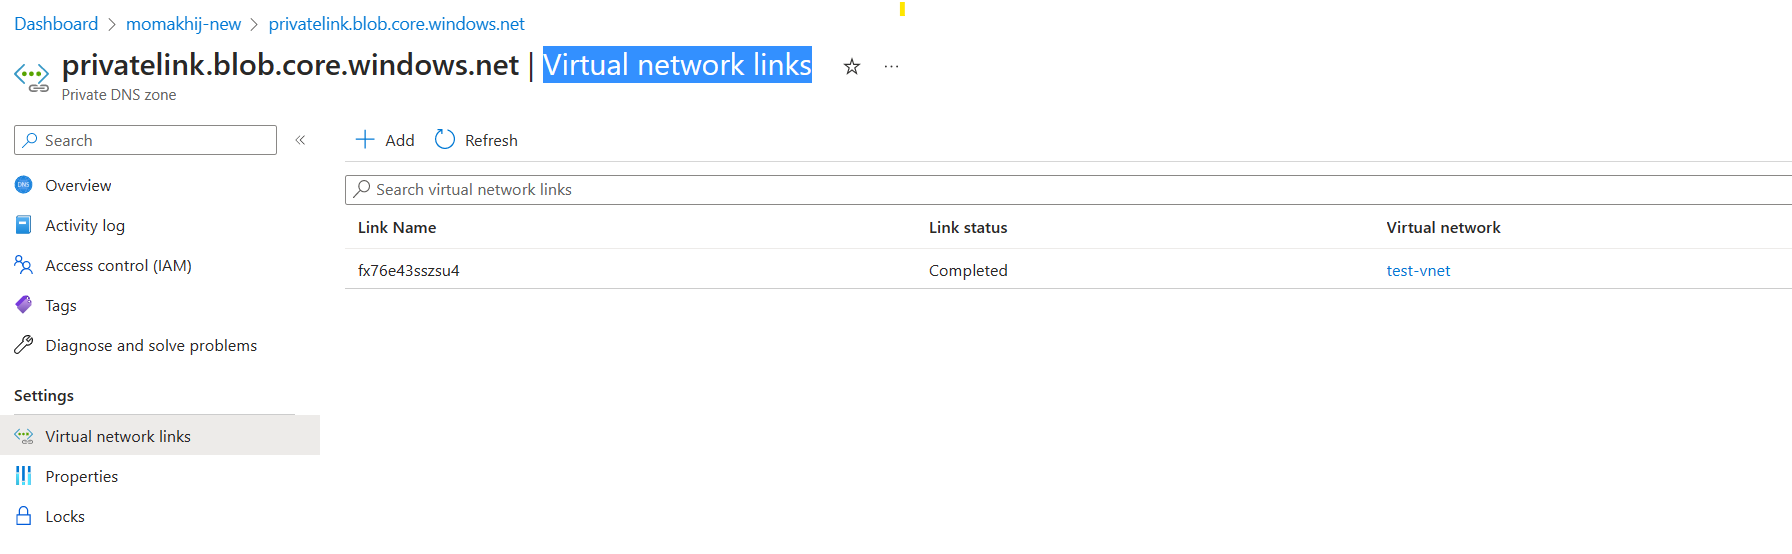 Screenshot that shows adding a virtual network link to a private DNS zone.